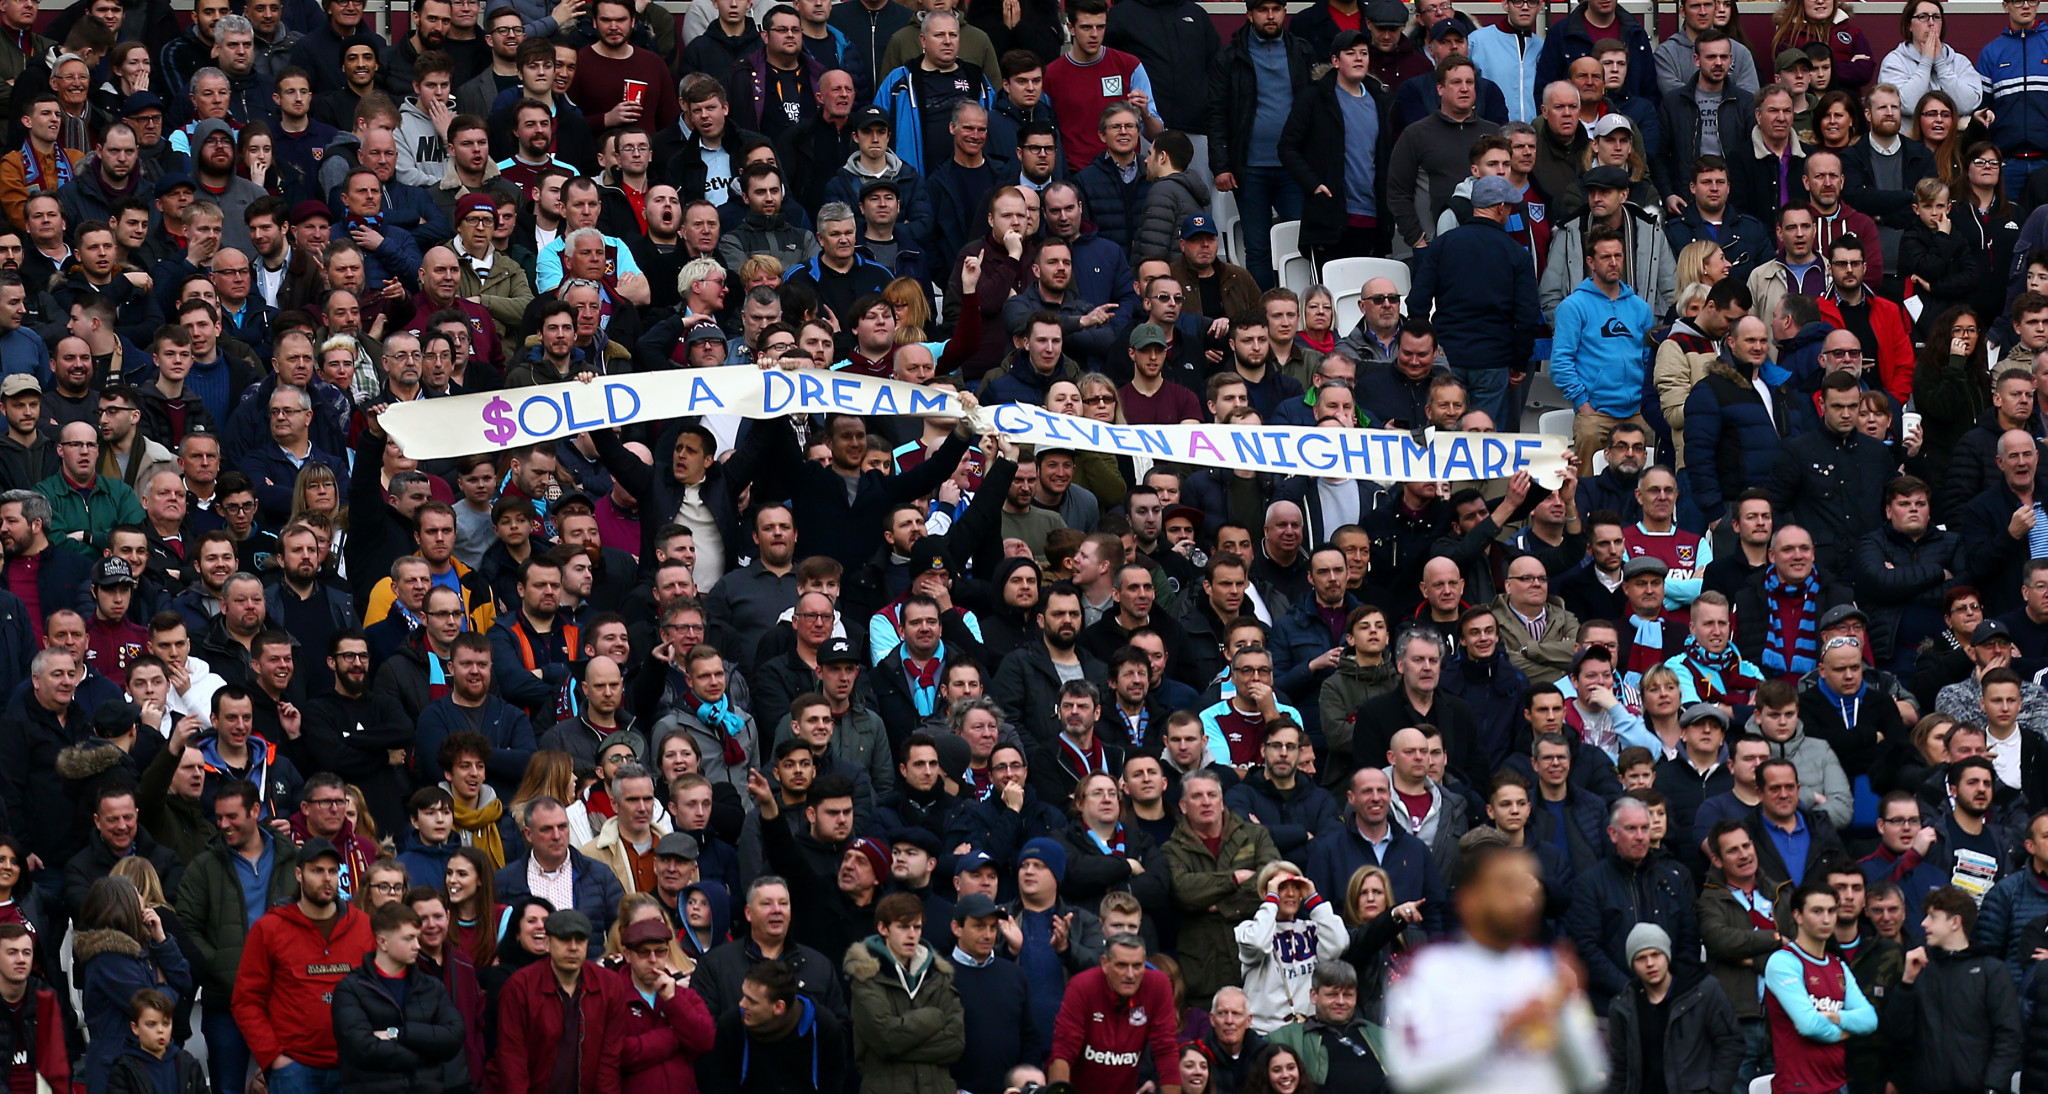 West Ham United fans protested about the Olympic Stadium during a match against Burnley earlier this month ©Getty Images